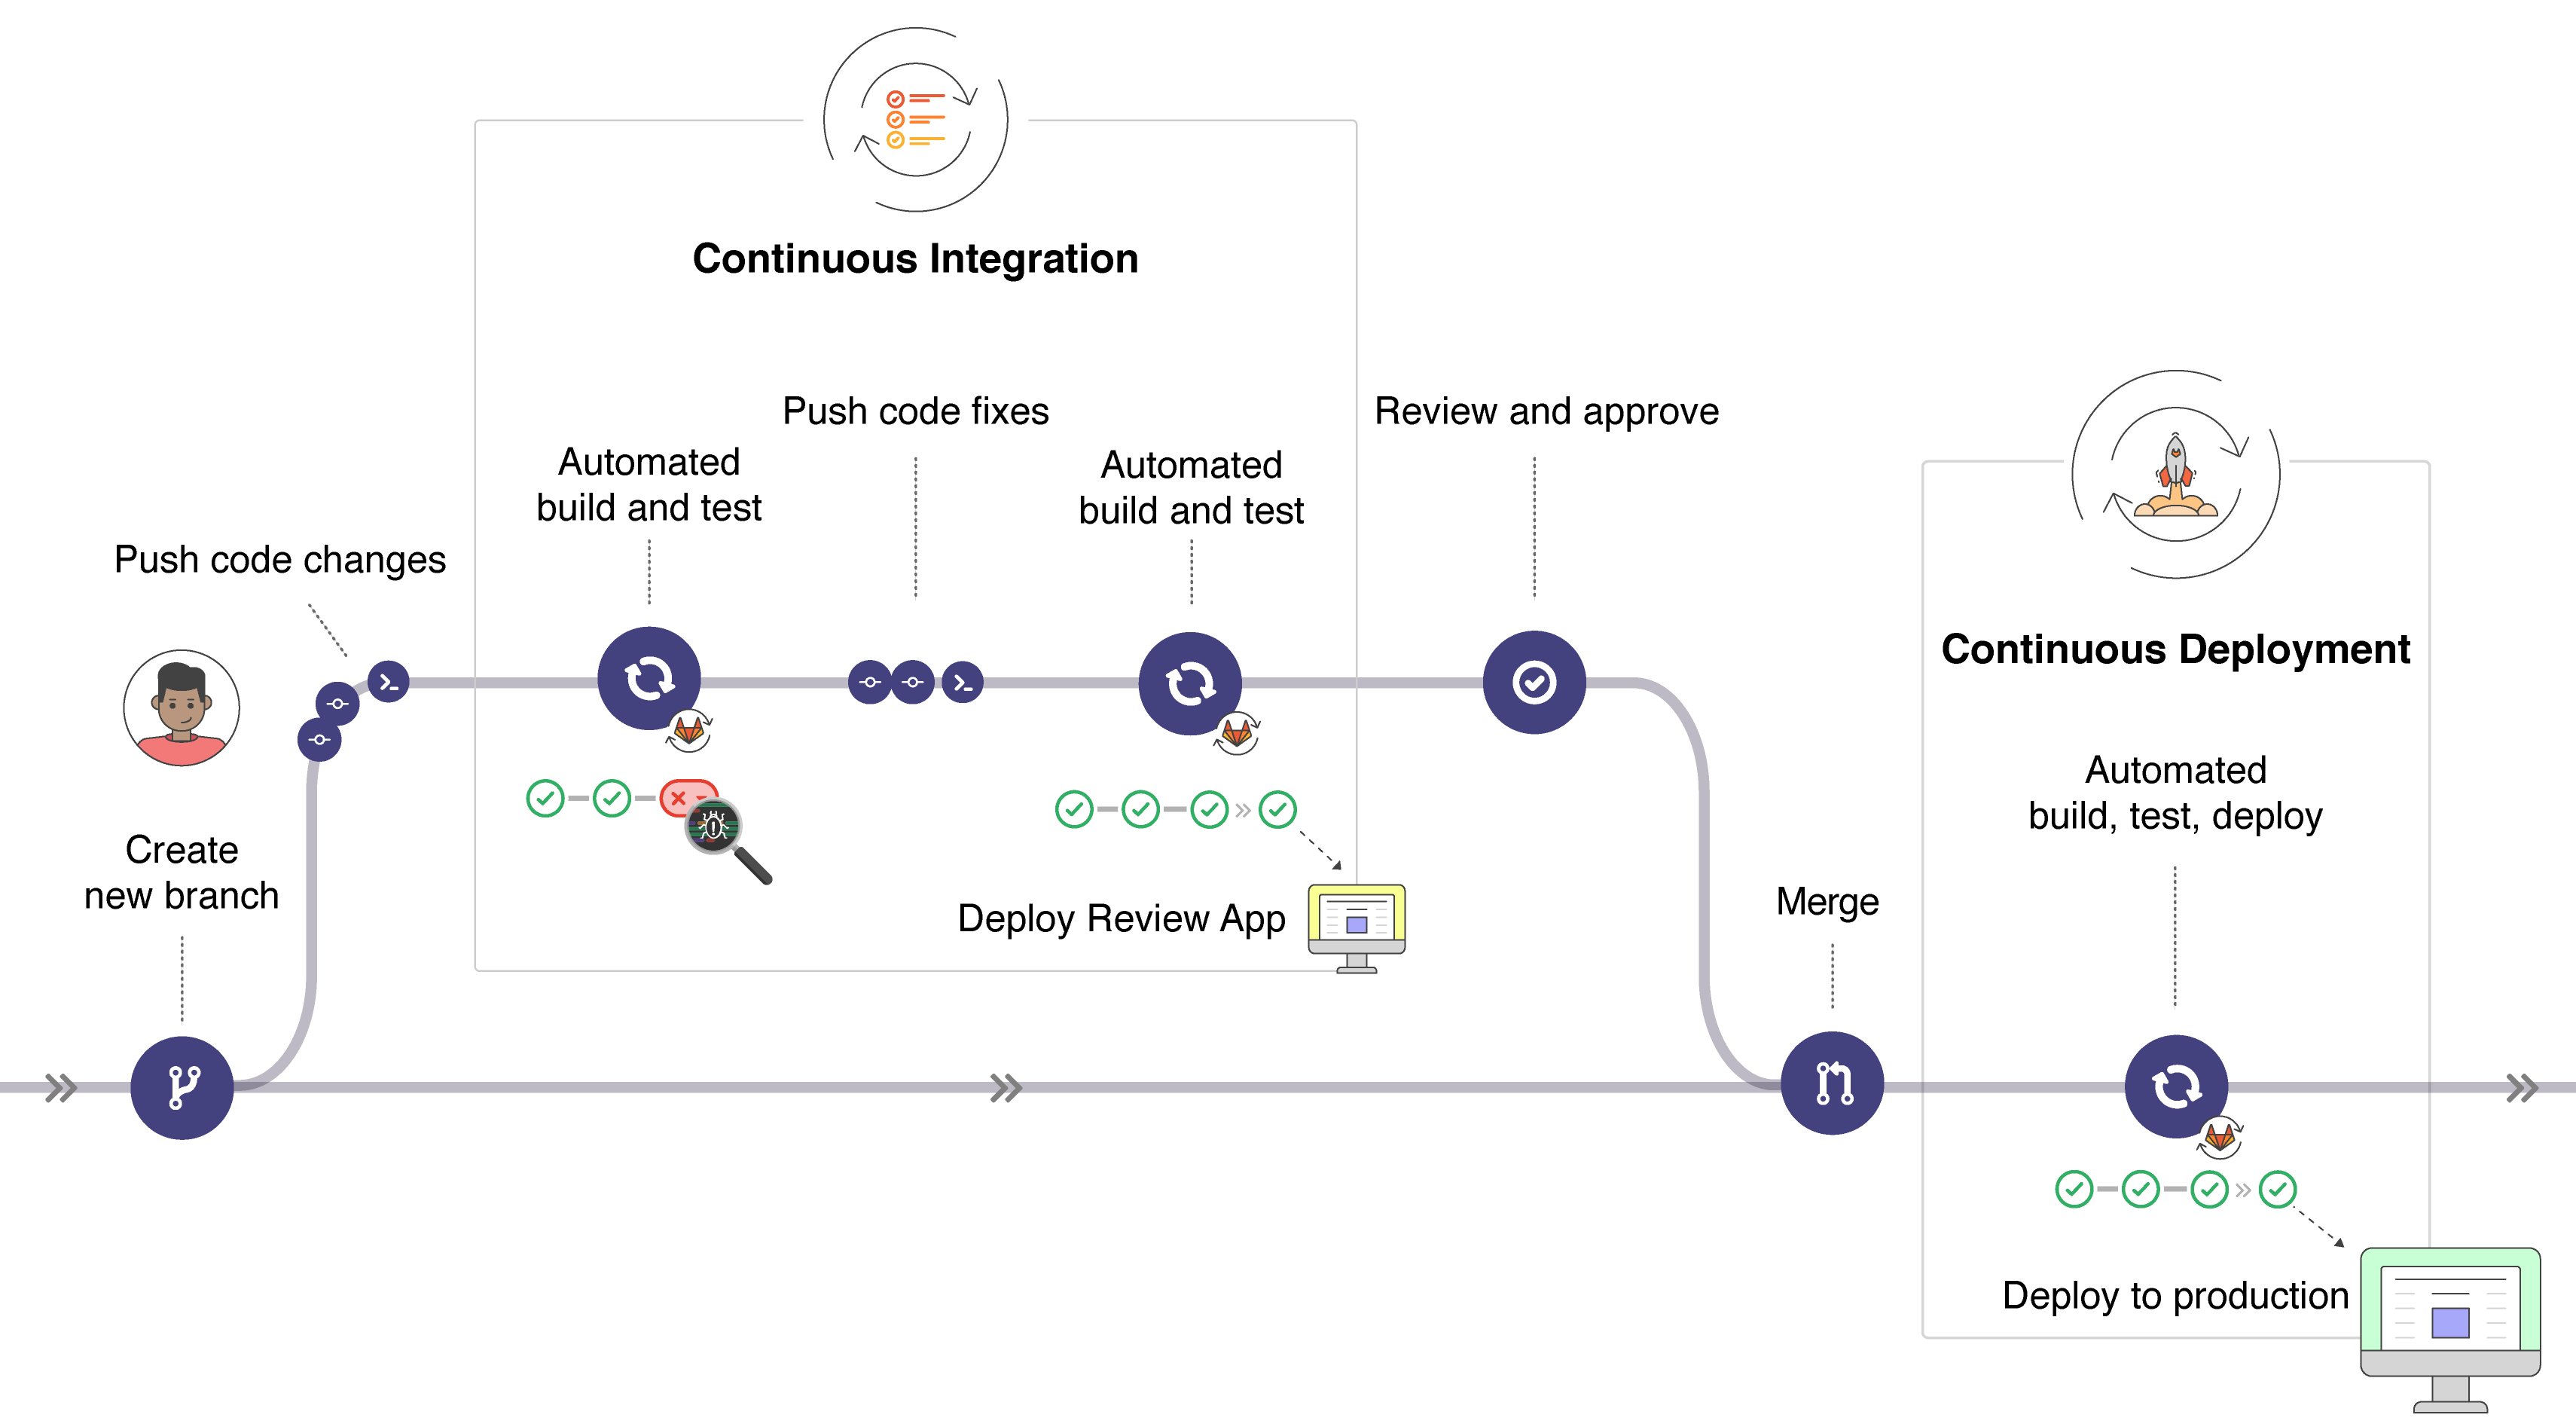 doc/ci/introduction/img/gitlab_workflow_example_11_9.png